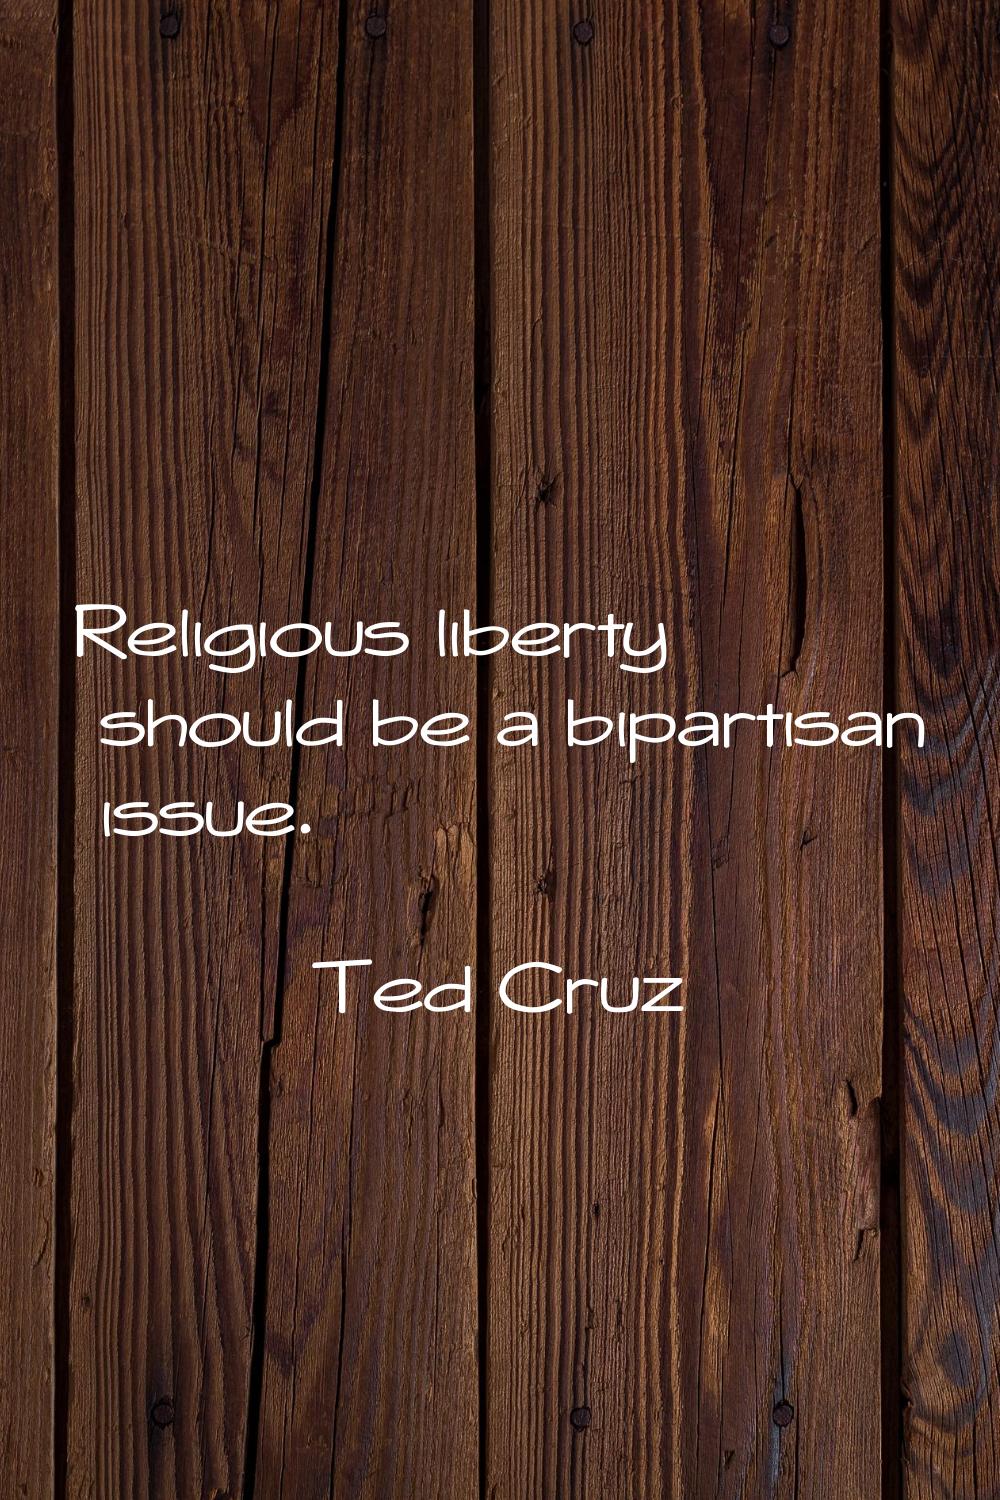 Religious liberty should be a bipartisan issue.